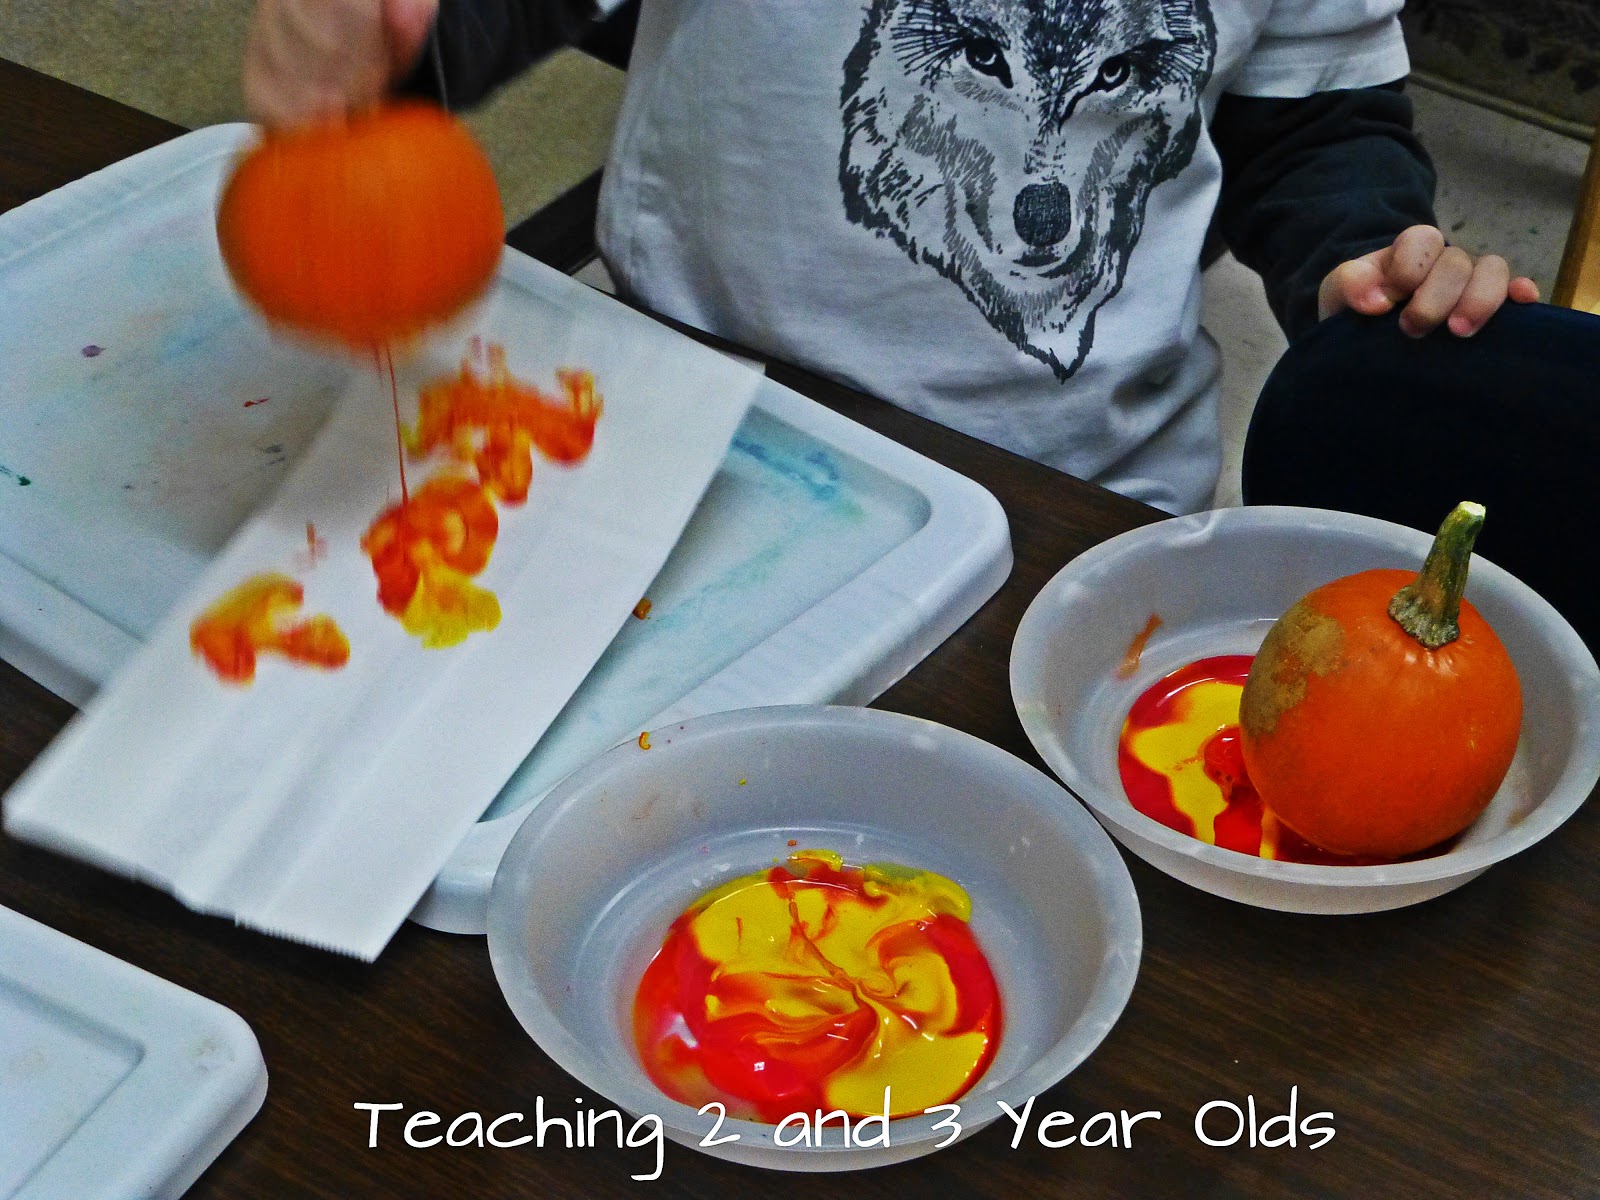 Teaching 2 and 3 Year Olds: Painting With Pumpkins